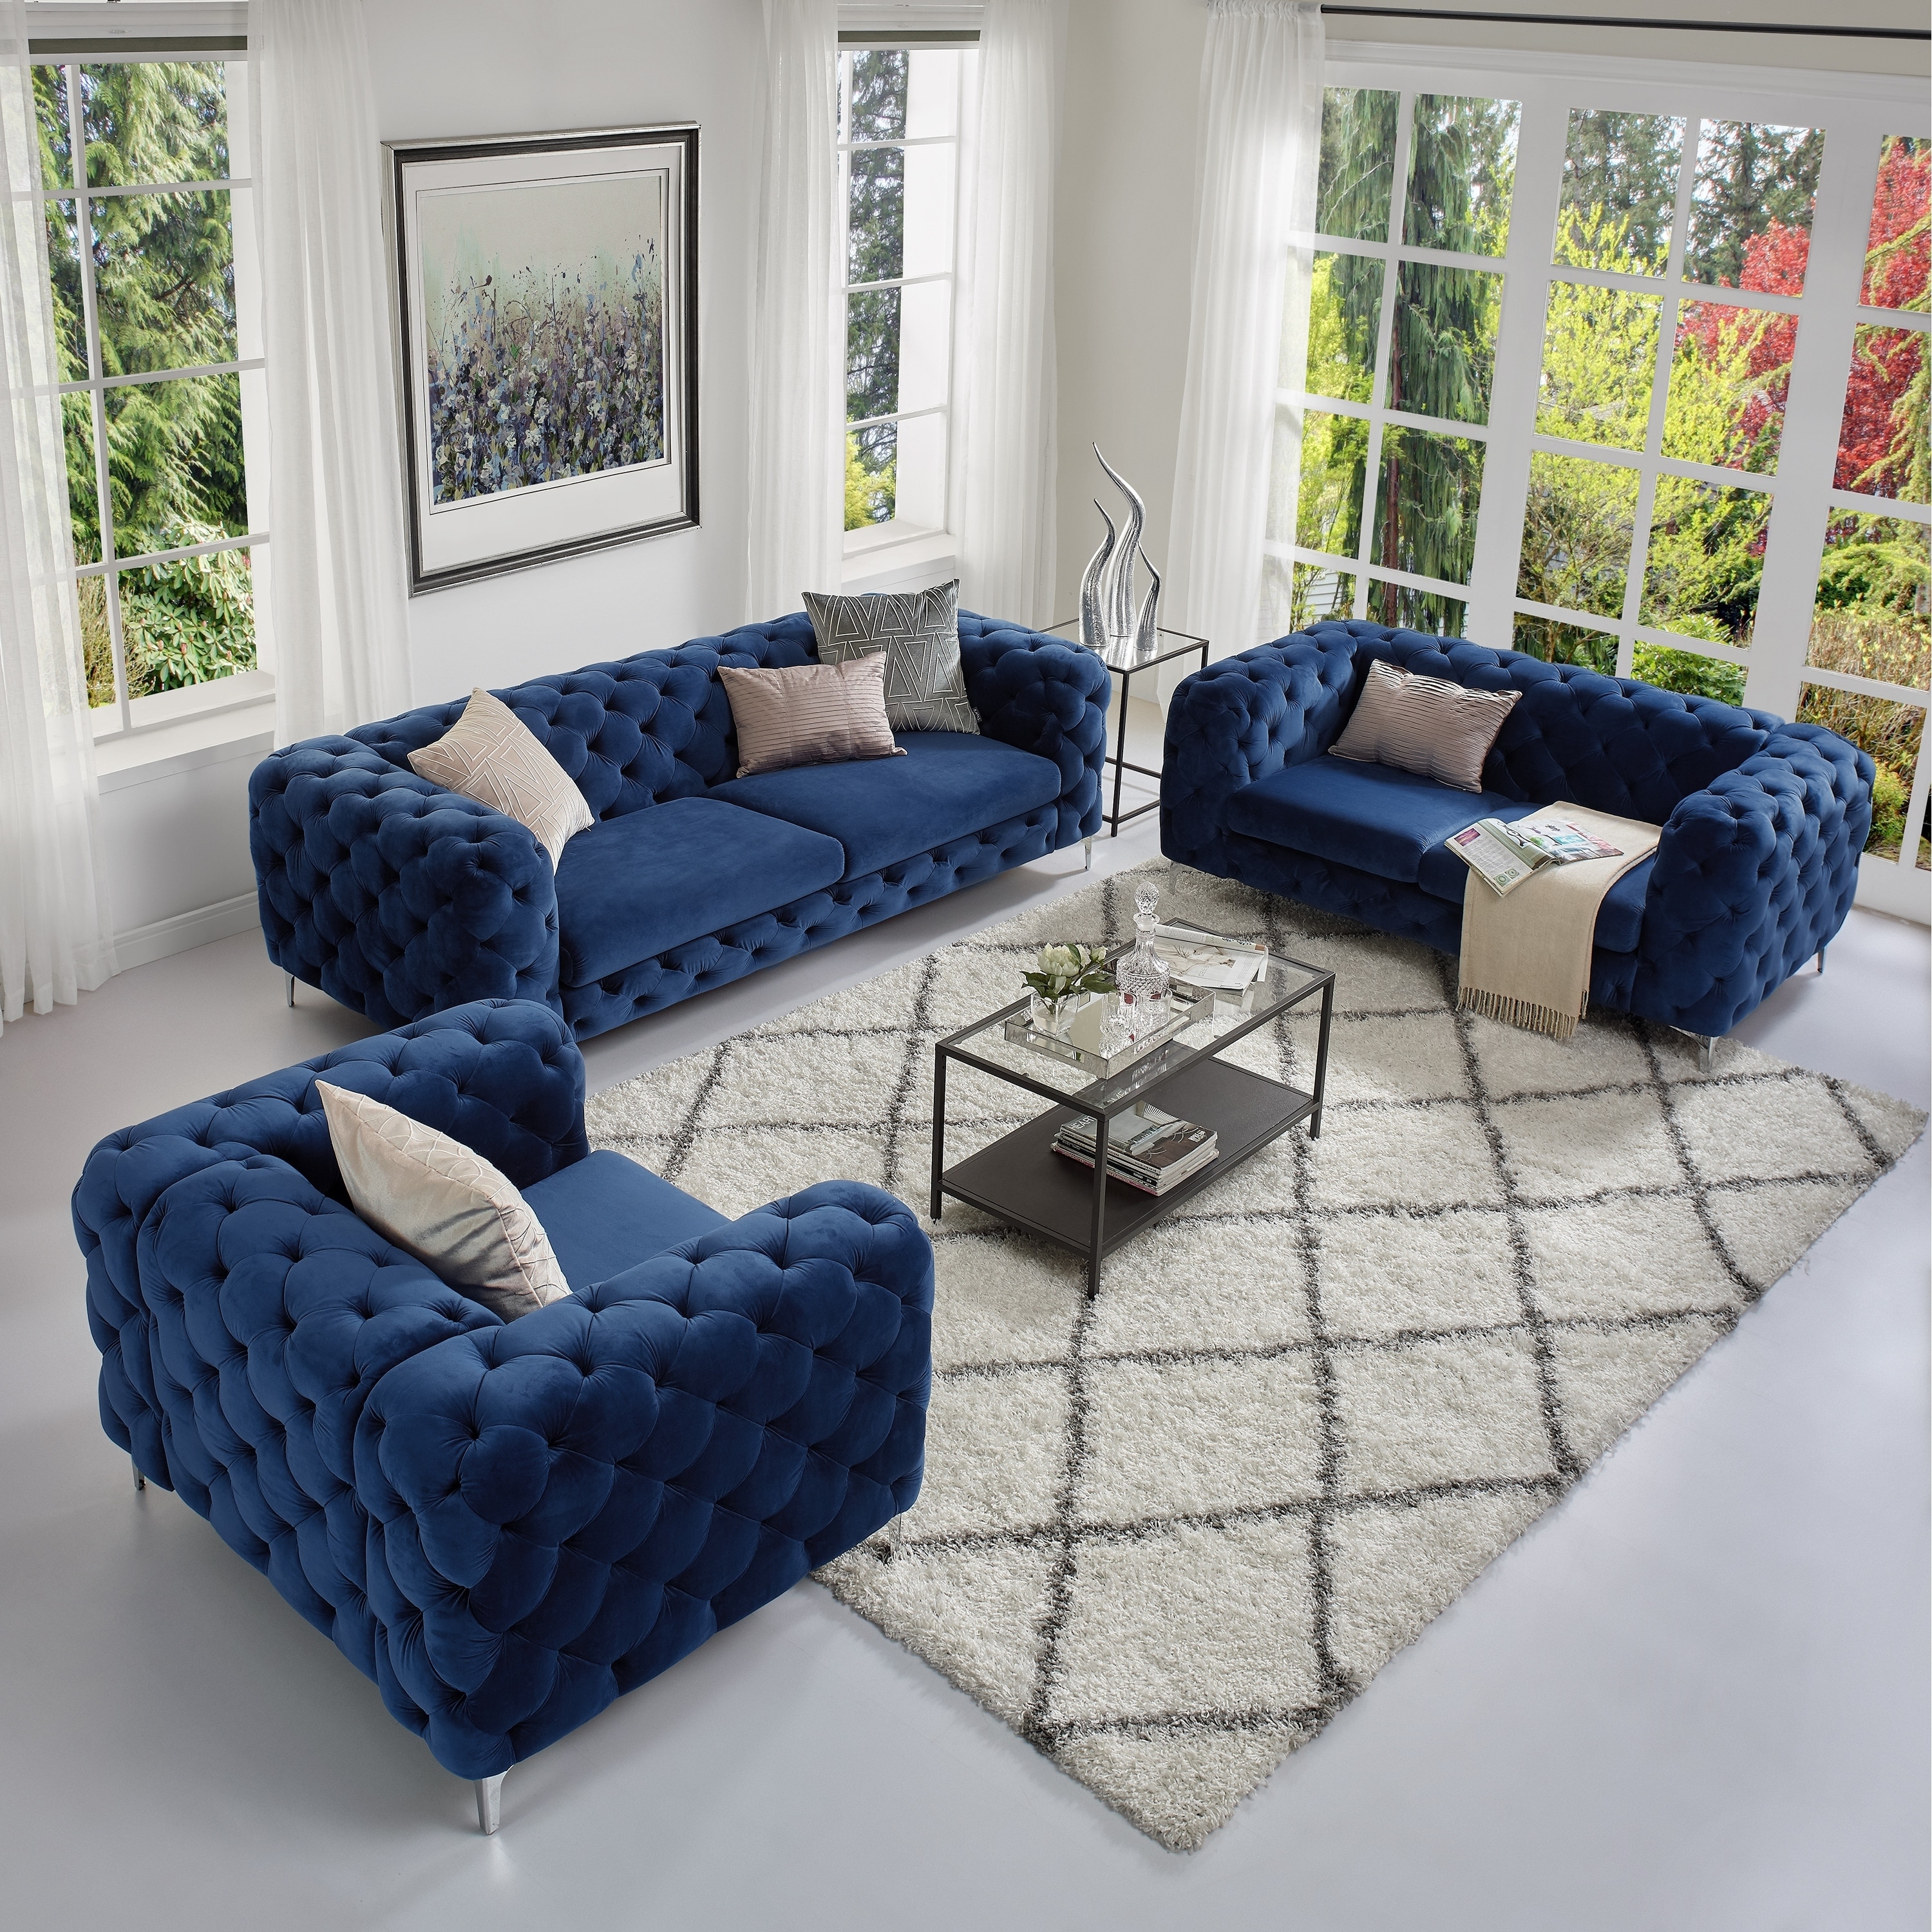 Couch Sets